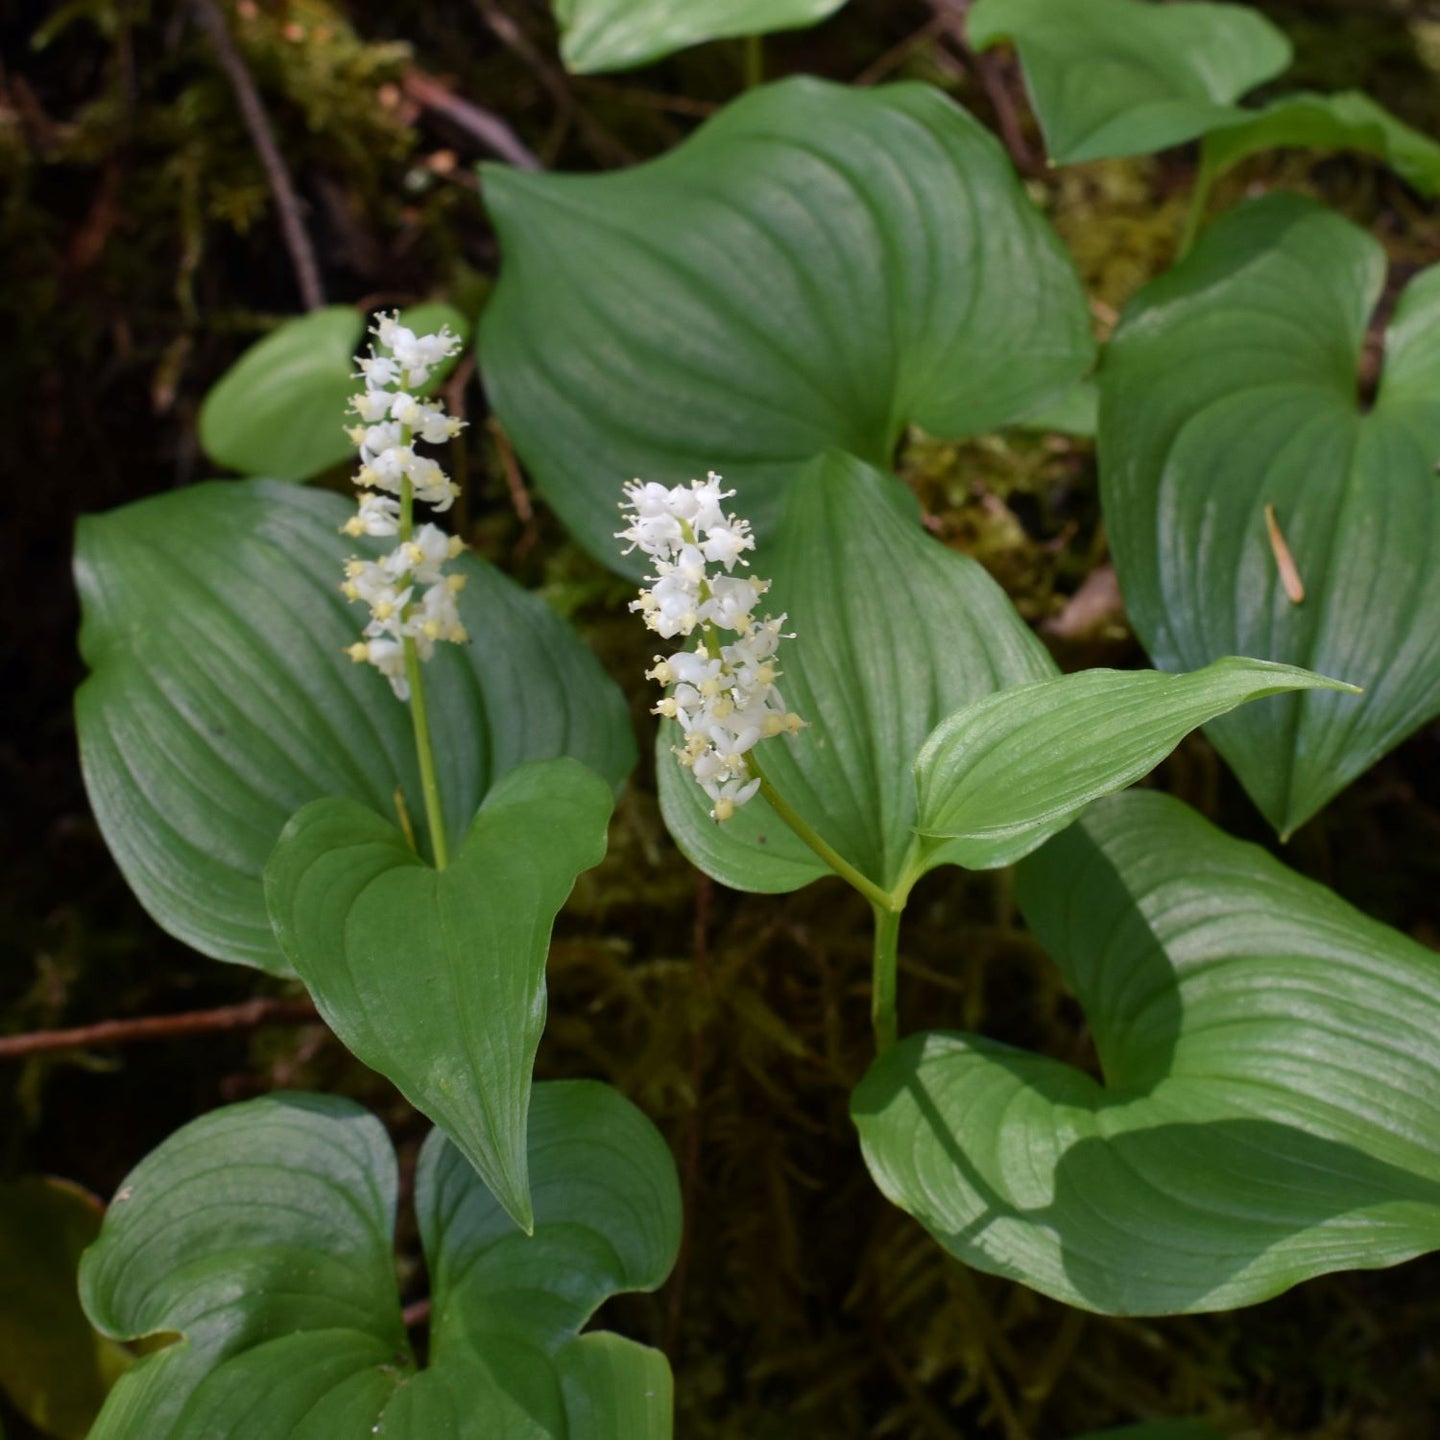 Close-up of white flower cluster and leaves of False-Lily-of-the-Valley (Maianthemum dilatatum). Another stunning Pacific Northwest native plant available at Sparrowhawk Native Plants Nursery in Portland, Oregon.